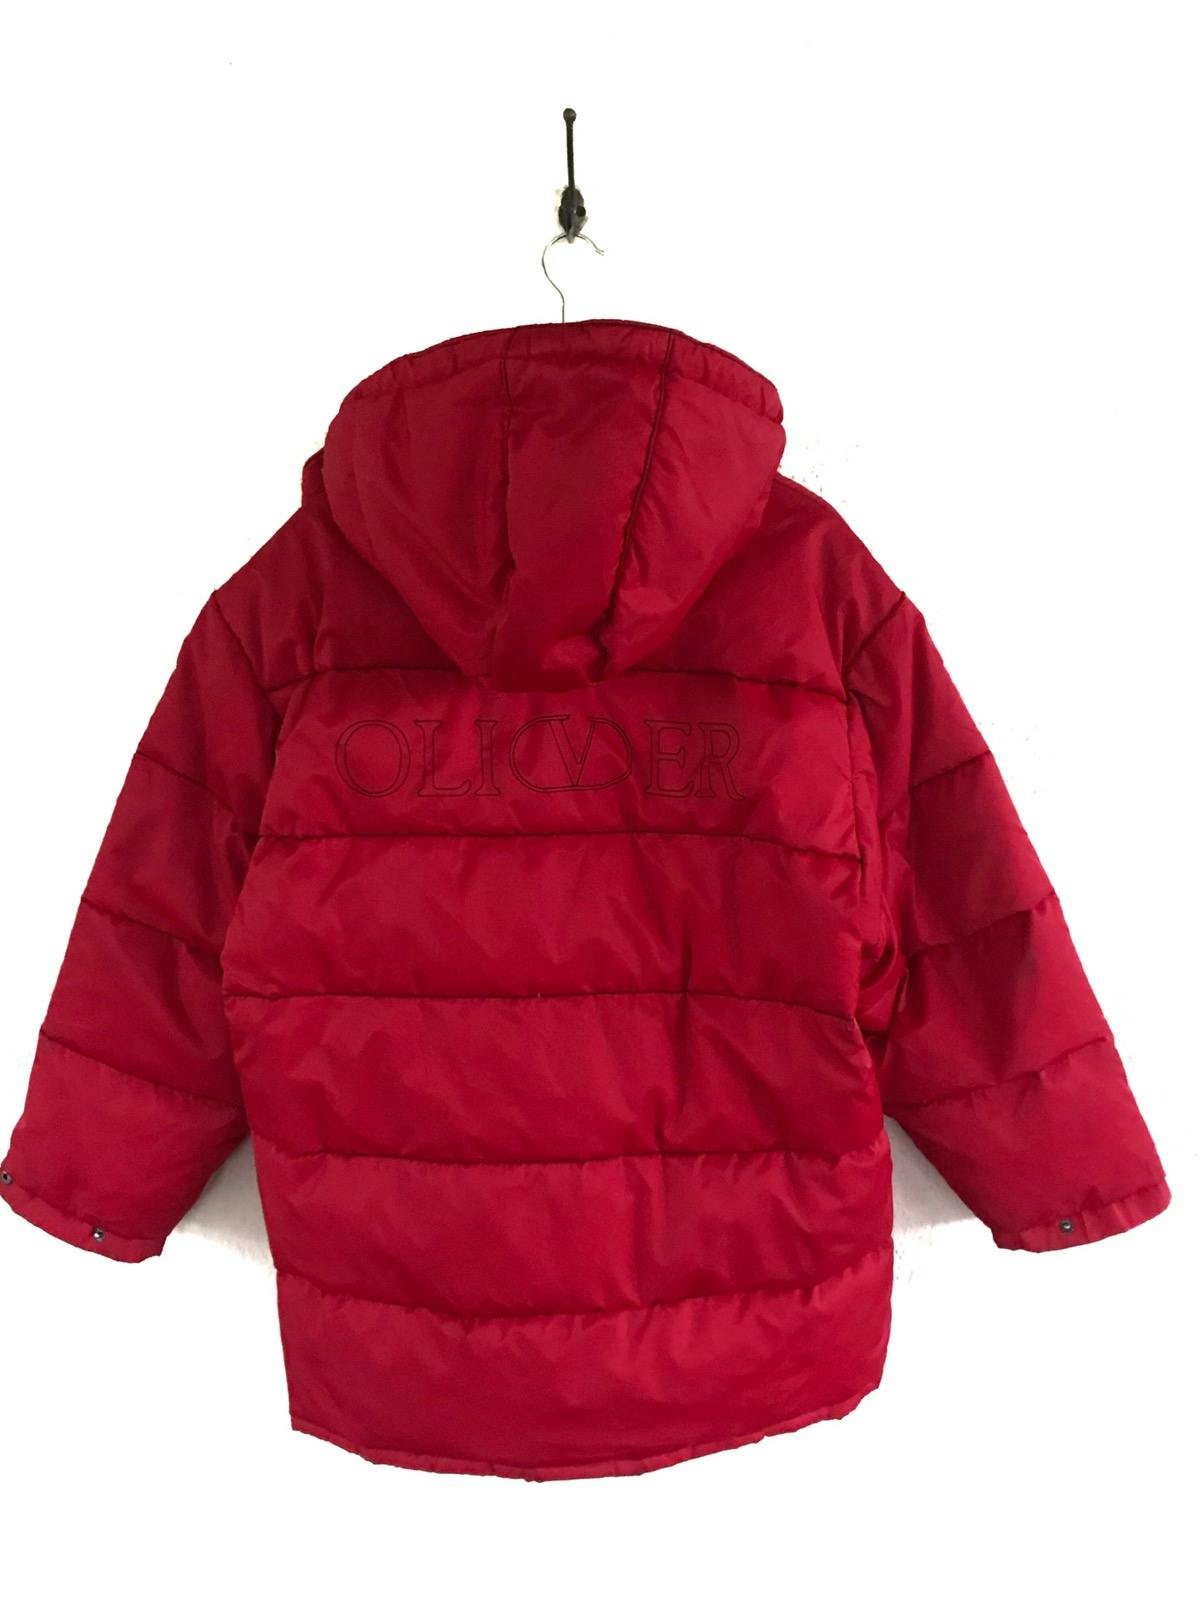 Oliver Valentino Spellout Puffer Down Jacket - 11